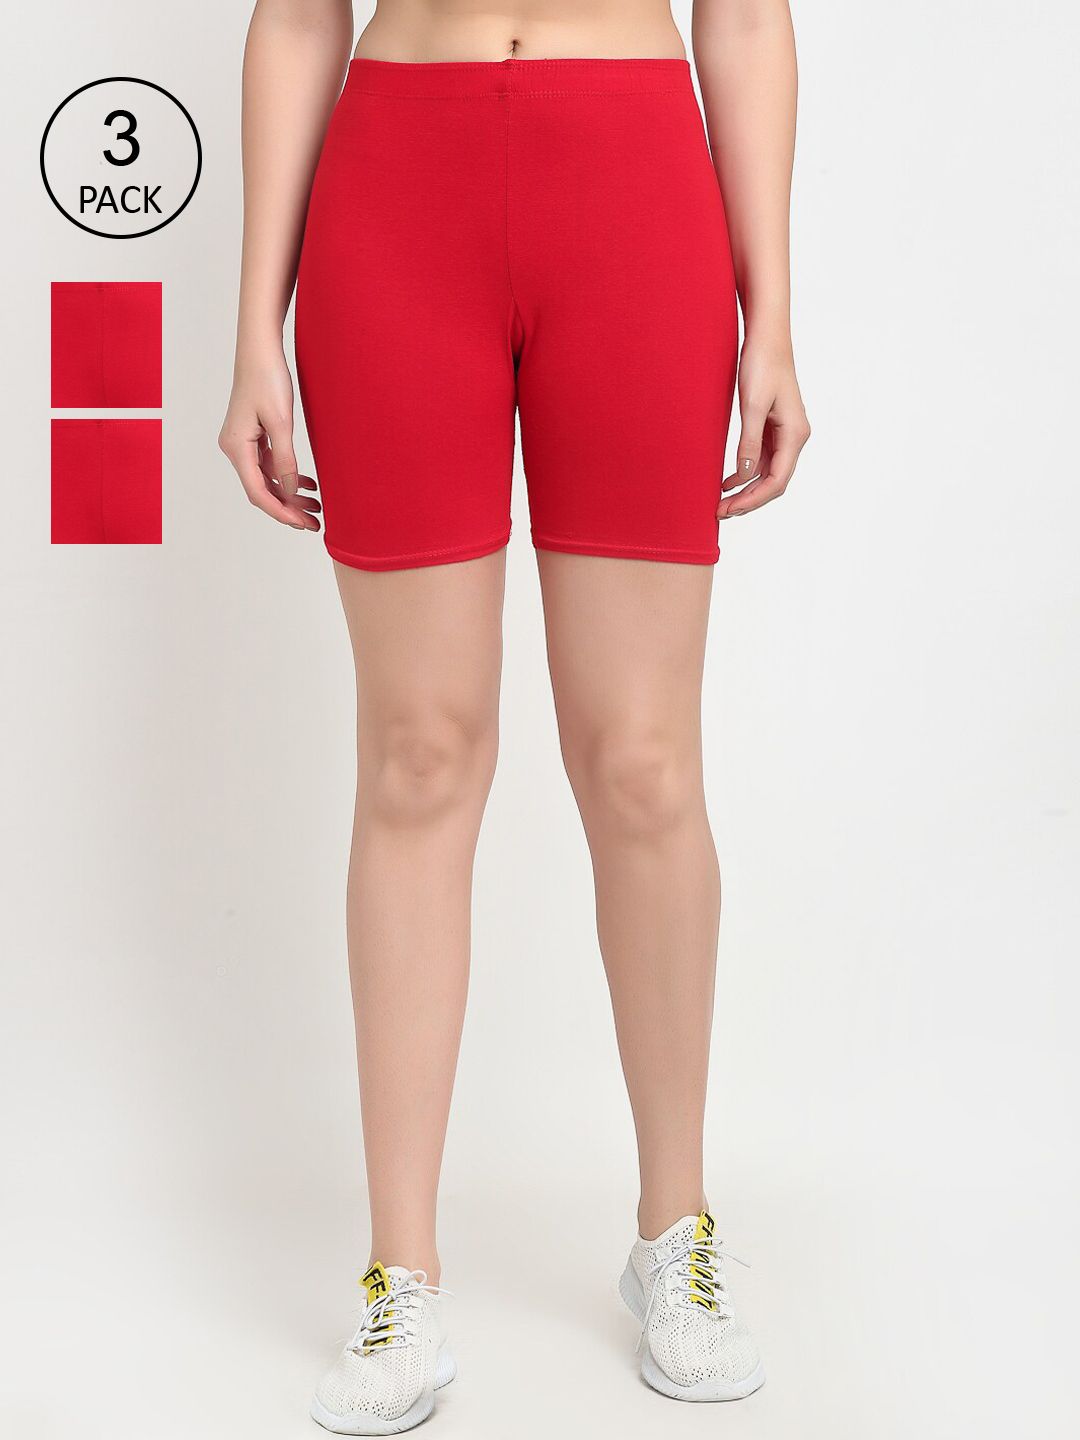 GRACIT Women Set of 3 Red Skinny Fit Biker Shorts Price in India